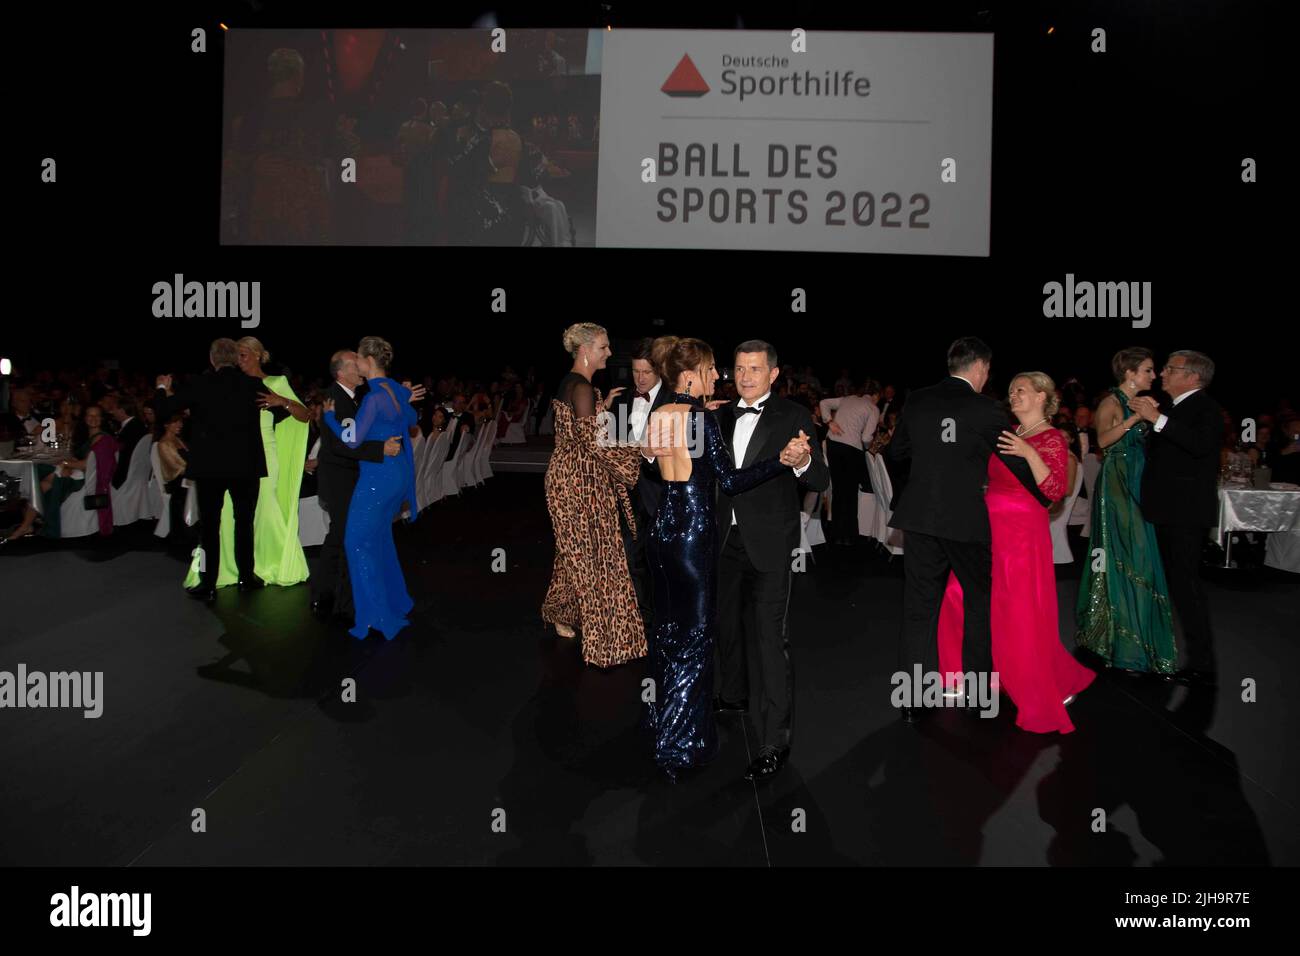 The dancing couples Nancy FAESER, Federal Minister of the Interior, and Christian SEIFERT, Chairman of the Supervisory Board of the Deutsche Sporthilfe Foundation, Denise SCHINDLER, para-cyclist and Thomas BERLEMANN, Management Chairman of the Deutsche Sporthilfe Foundation, Franziska van ALMSICK, Deputy Chairman of the Supervisory Board of the Deutsche Sporthilfe Foundation, and Johannes B. KERNER, Moderator, Maria HOEFL-RIESCH, HÃ¶fl-Riesch, former skier, and Matthias STEINER, former weightlifter, Elena SEMECHIN, para-swimmer, and Gert-Uwe MENDE, SPD, Mayor of Wiesbaden, Eberhard GIENGER, fo Stock Photo